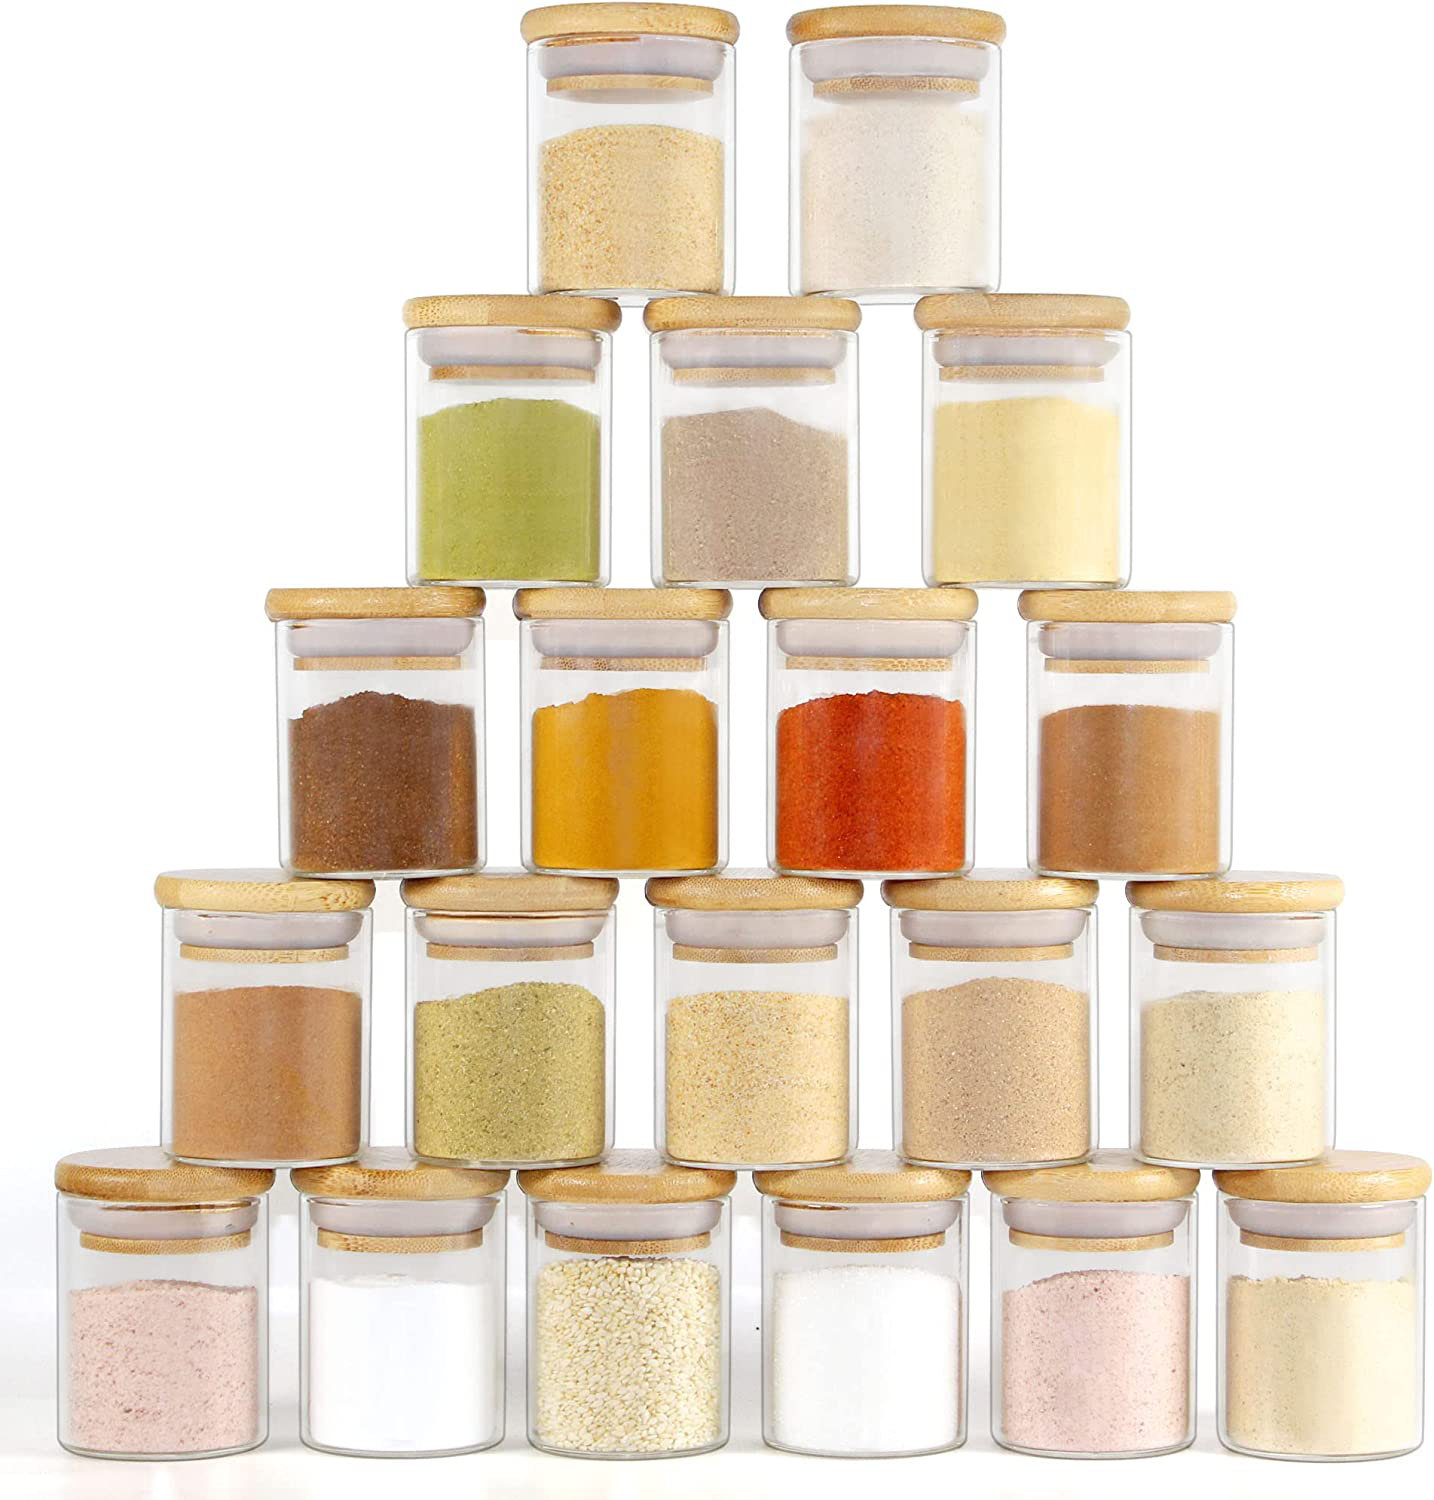 4 Oz. Glass Spice Jars With Bamboo Lid Eco Kitchen Collection